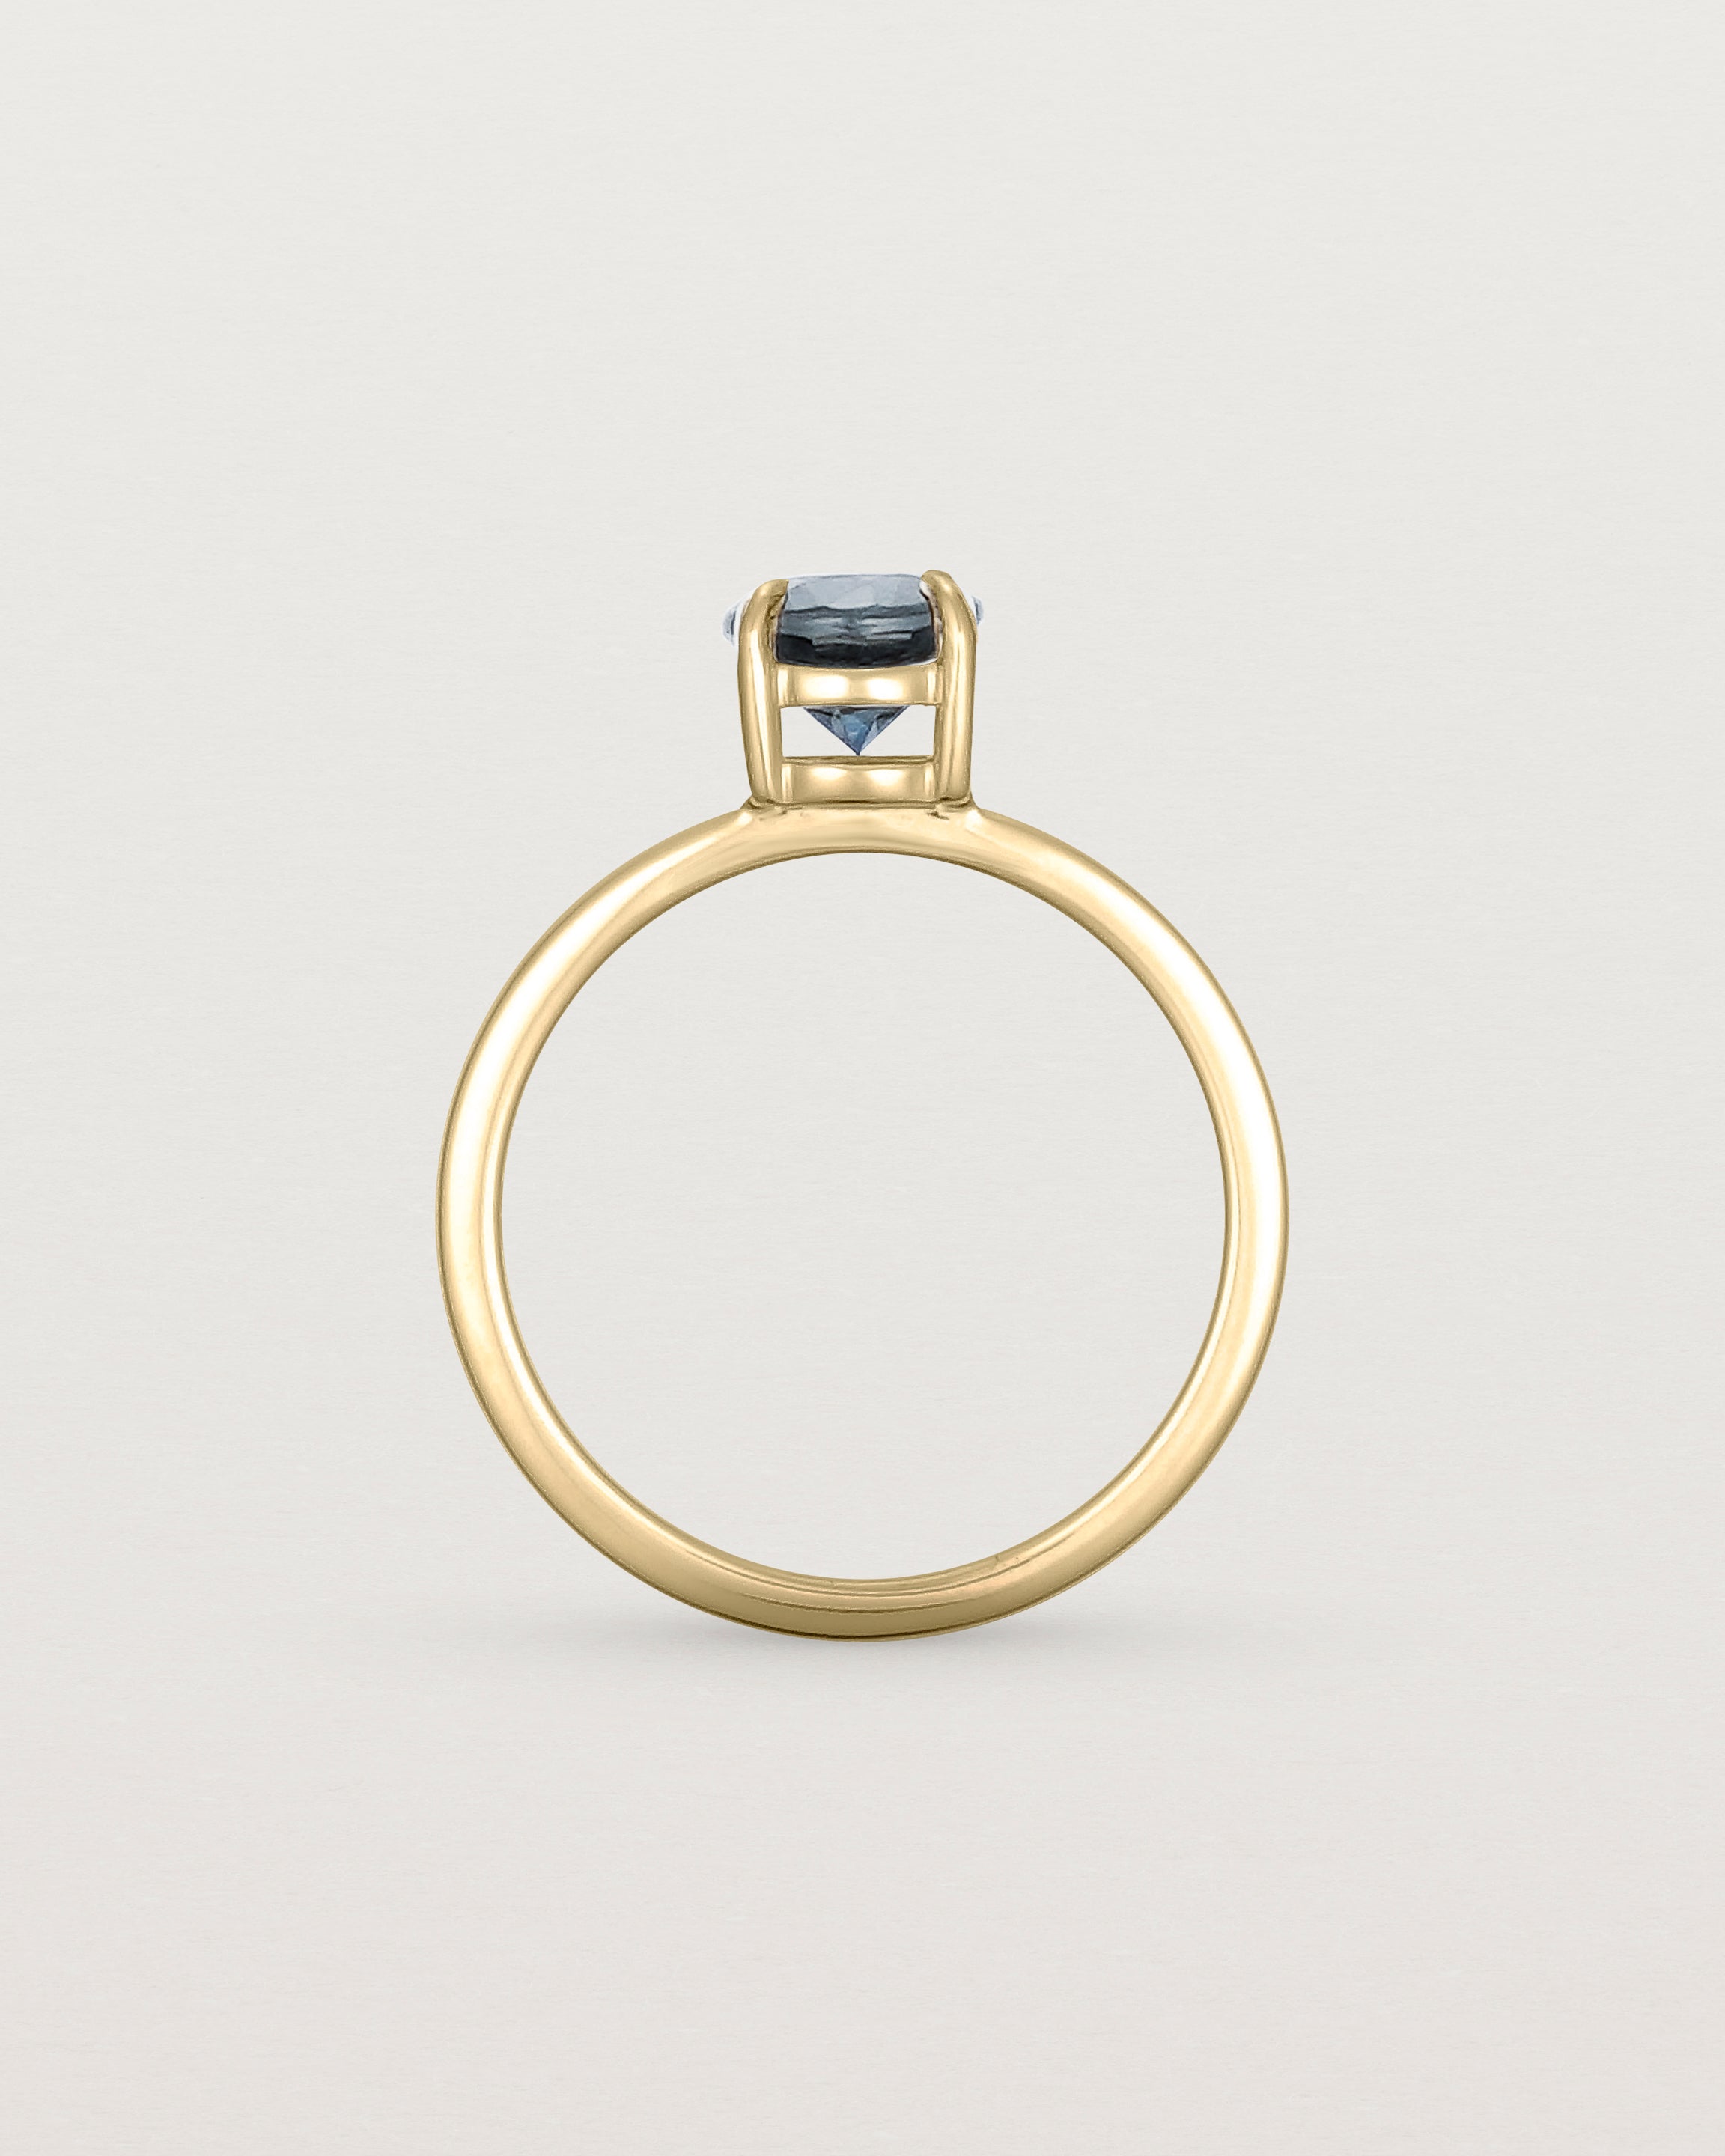 Standing view of the Petite Una Round Solitaire | Australian Sapphire | Yellow Gold.